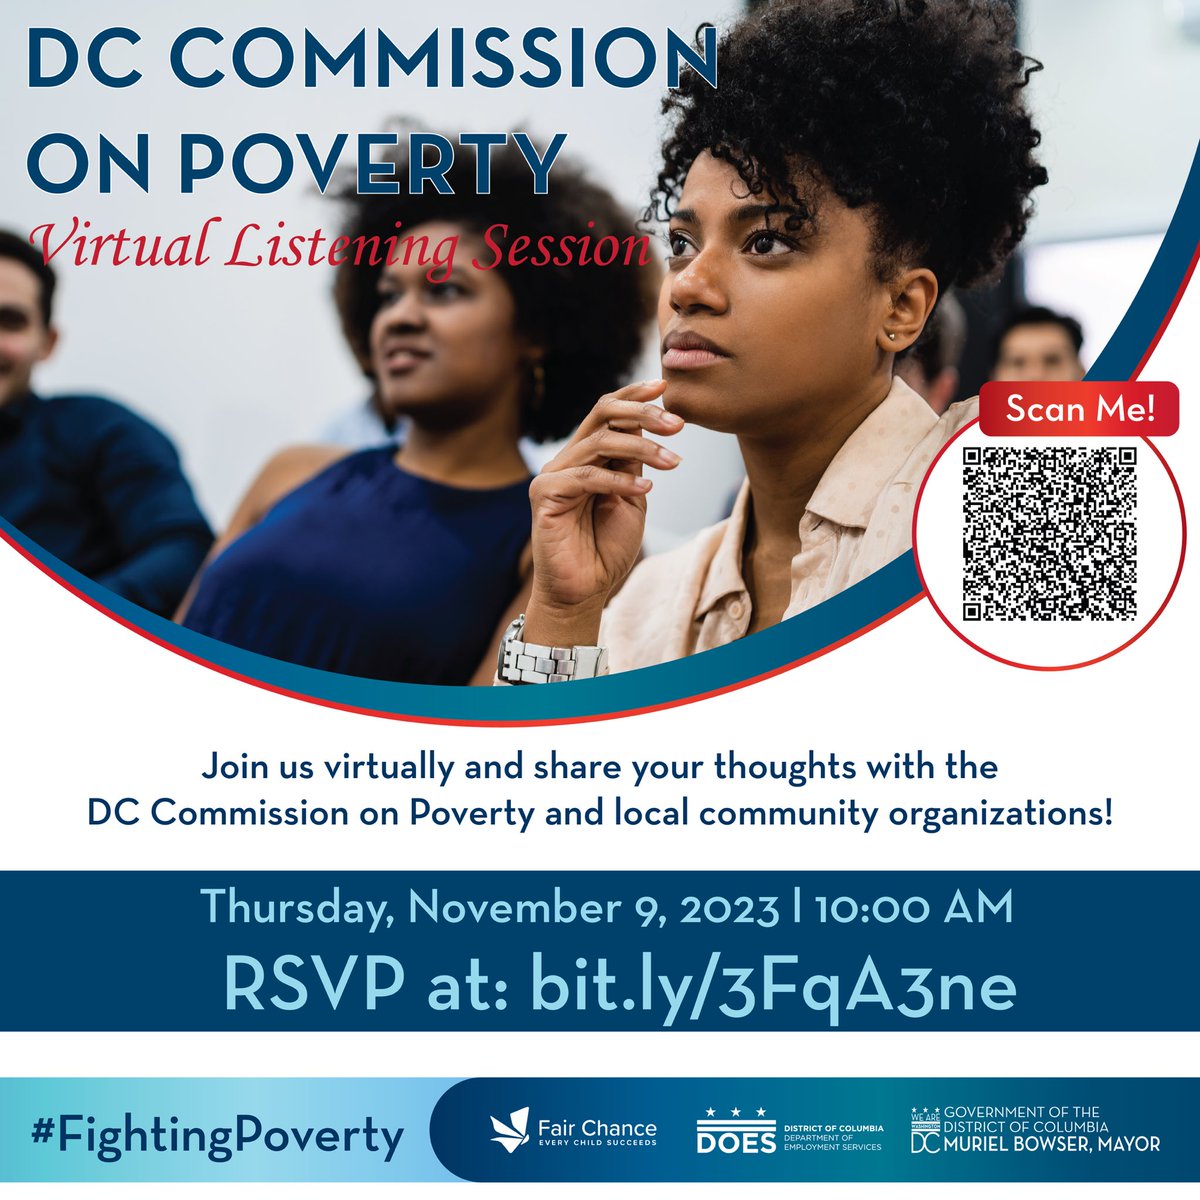 Share your thoughts with the DC Commission on Poverty and local community organizations! Join us virtually on Thursday, November 9, 2023, from 10:00 AM to 12:30 PM for an interactive listening session and have your voice heard! Register for the event HERE eventbrite.com/e/dc-commissio…